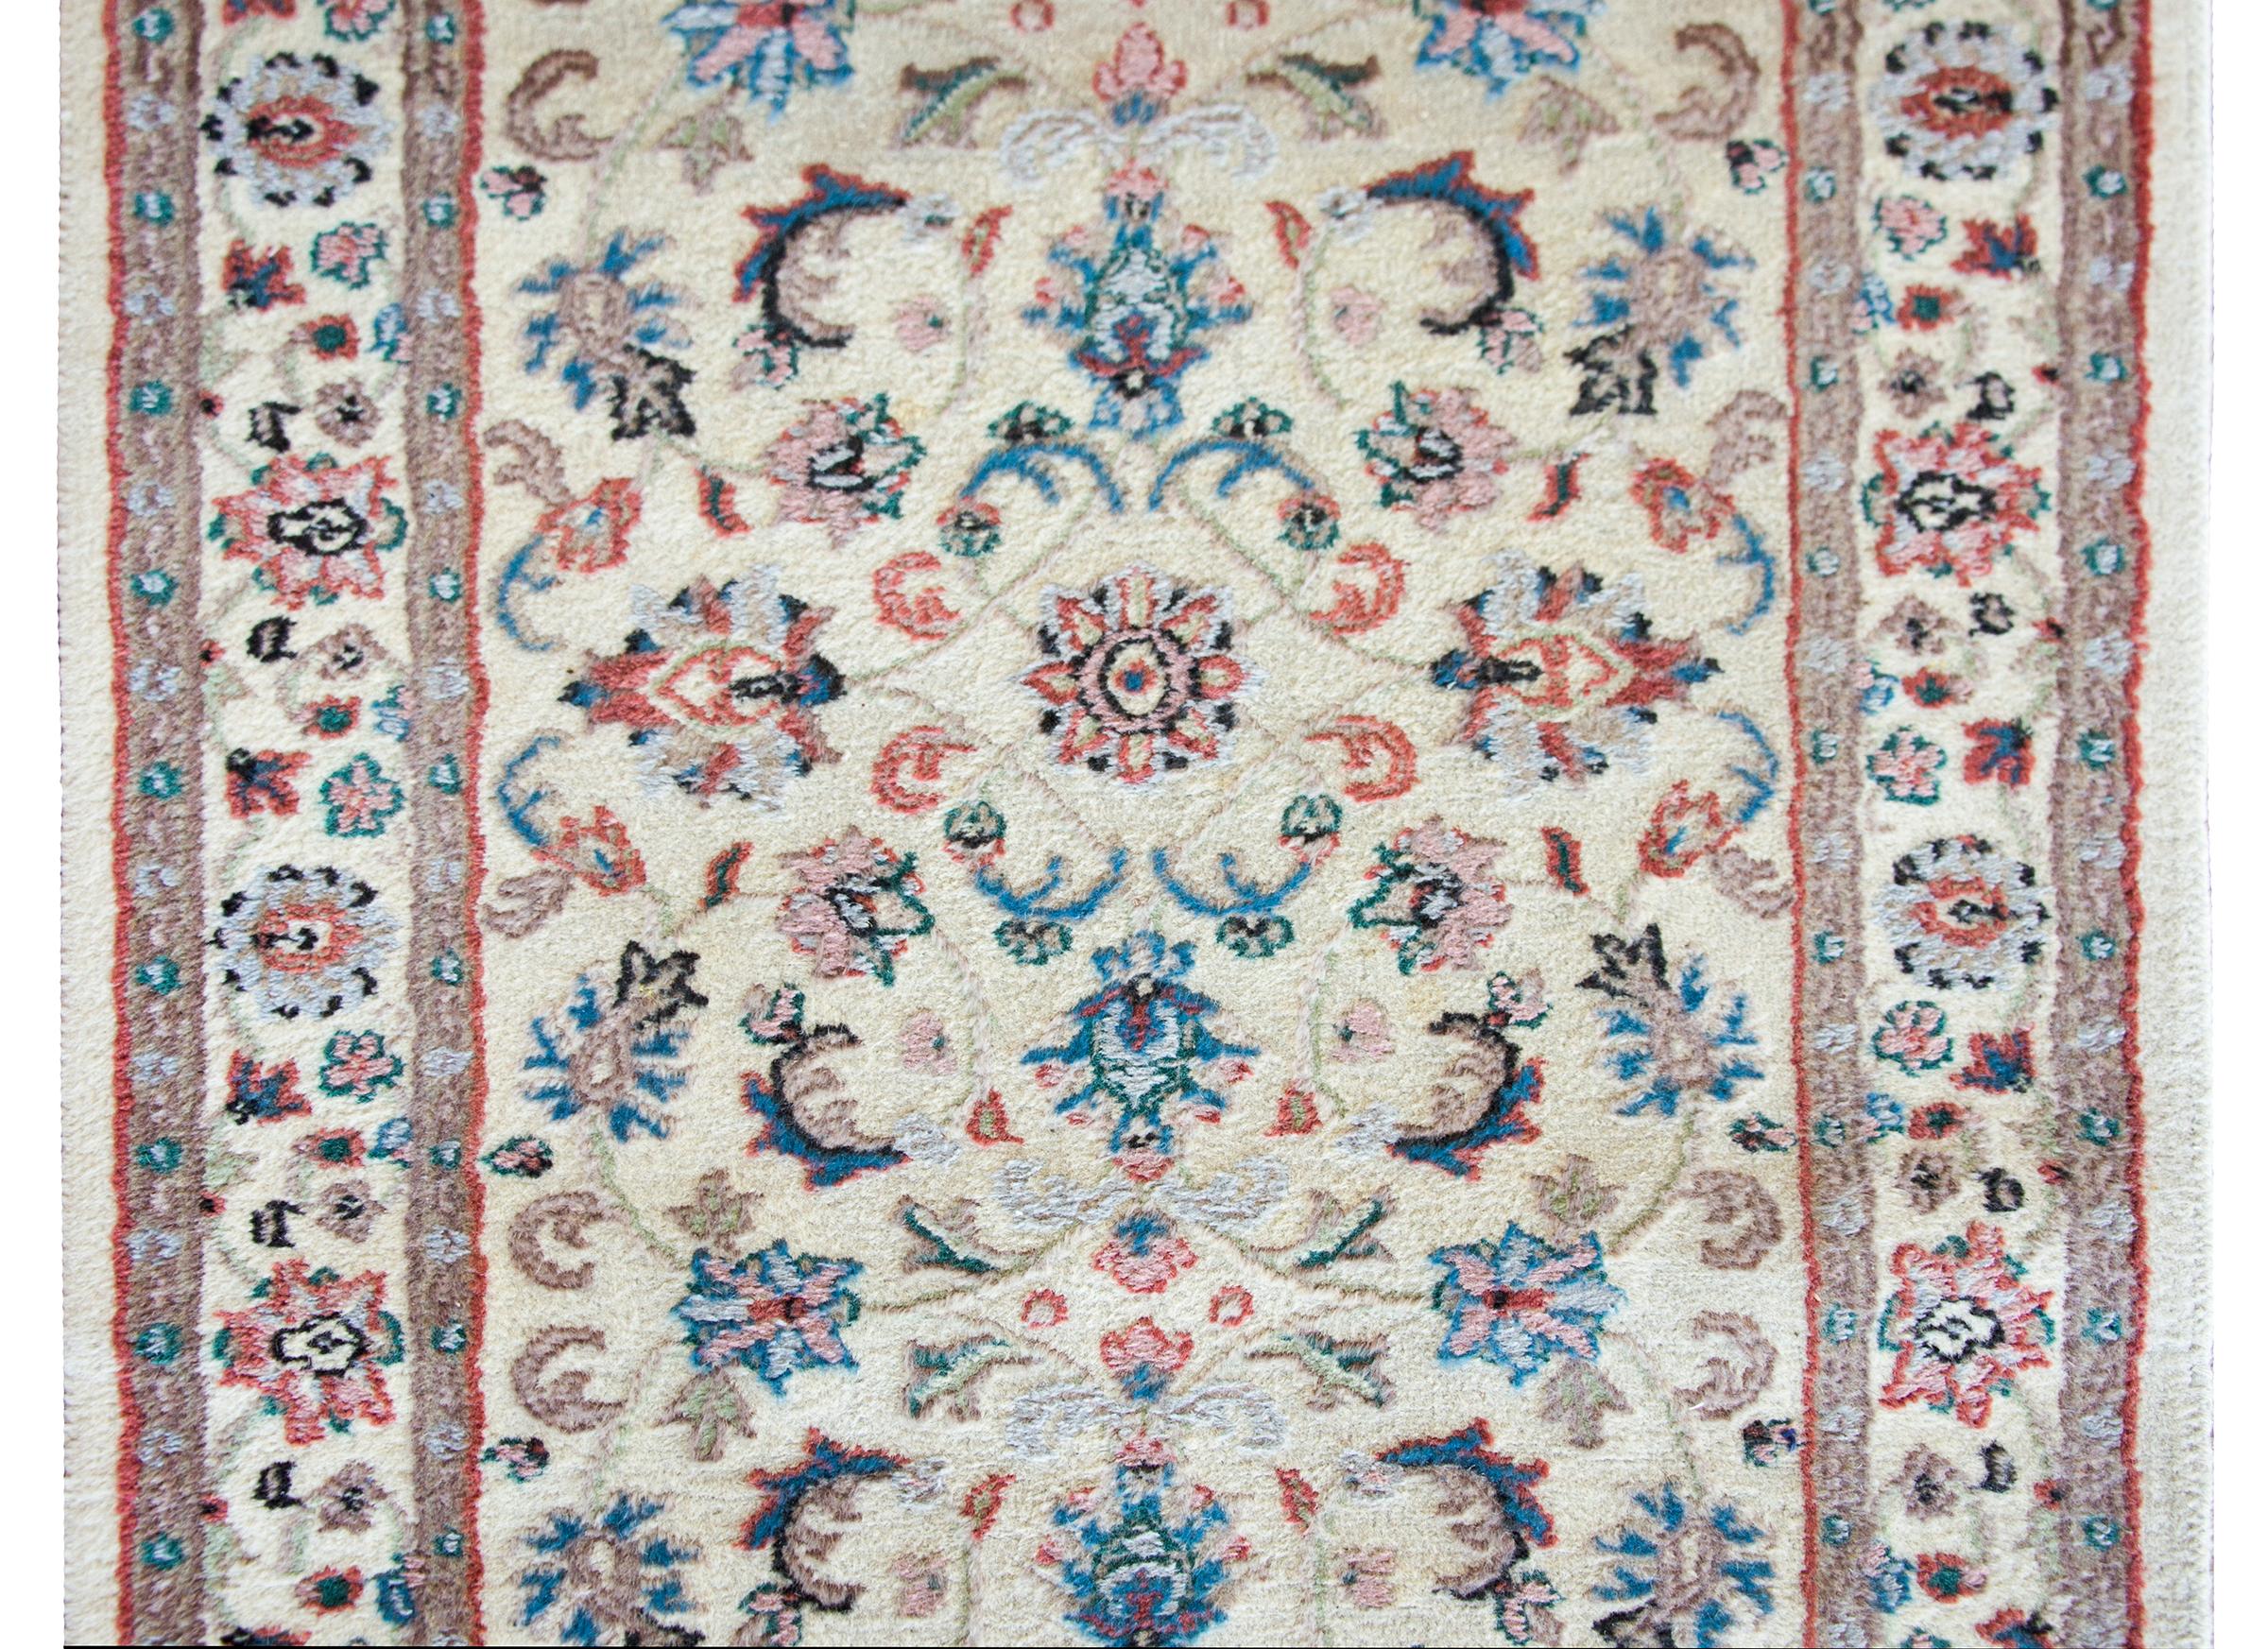 A wonderful late 20th century Indian rug with a beautiful hand-woven floral and scrolling vine pattern woven in crimson, pink, indigo, and gray against a cream colored background. The border is simple with a similar floral pattern as the field.